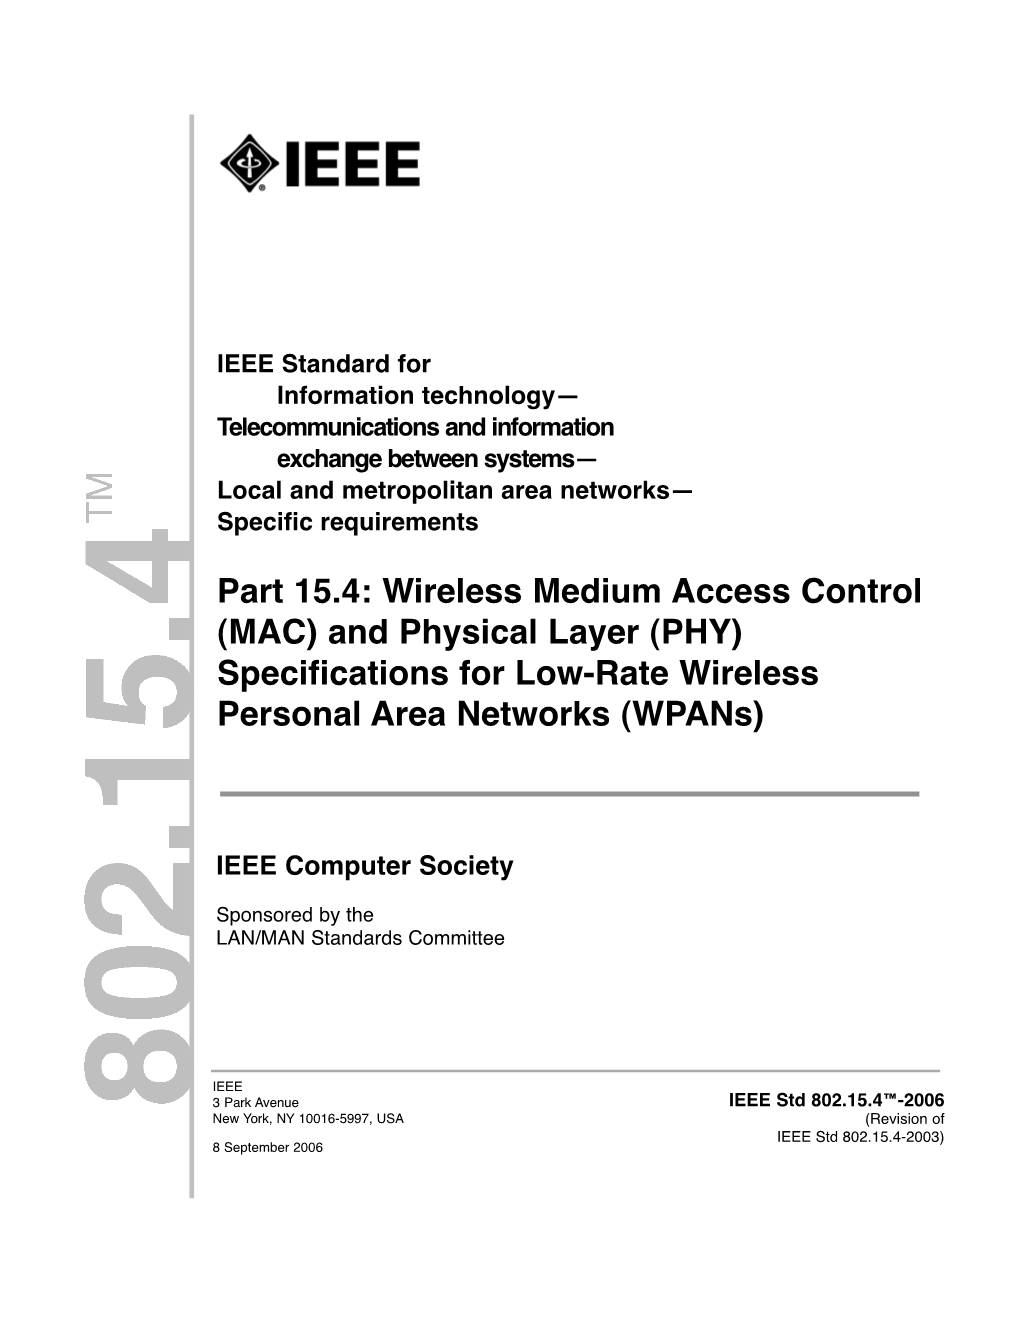 IEEE Standard for Information Technology- Telecommunications